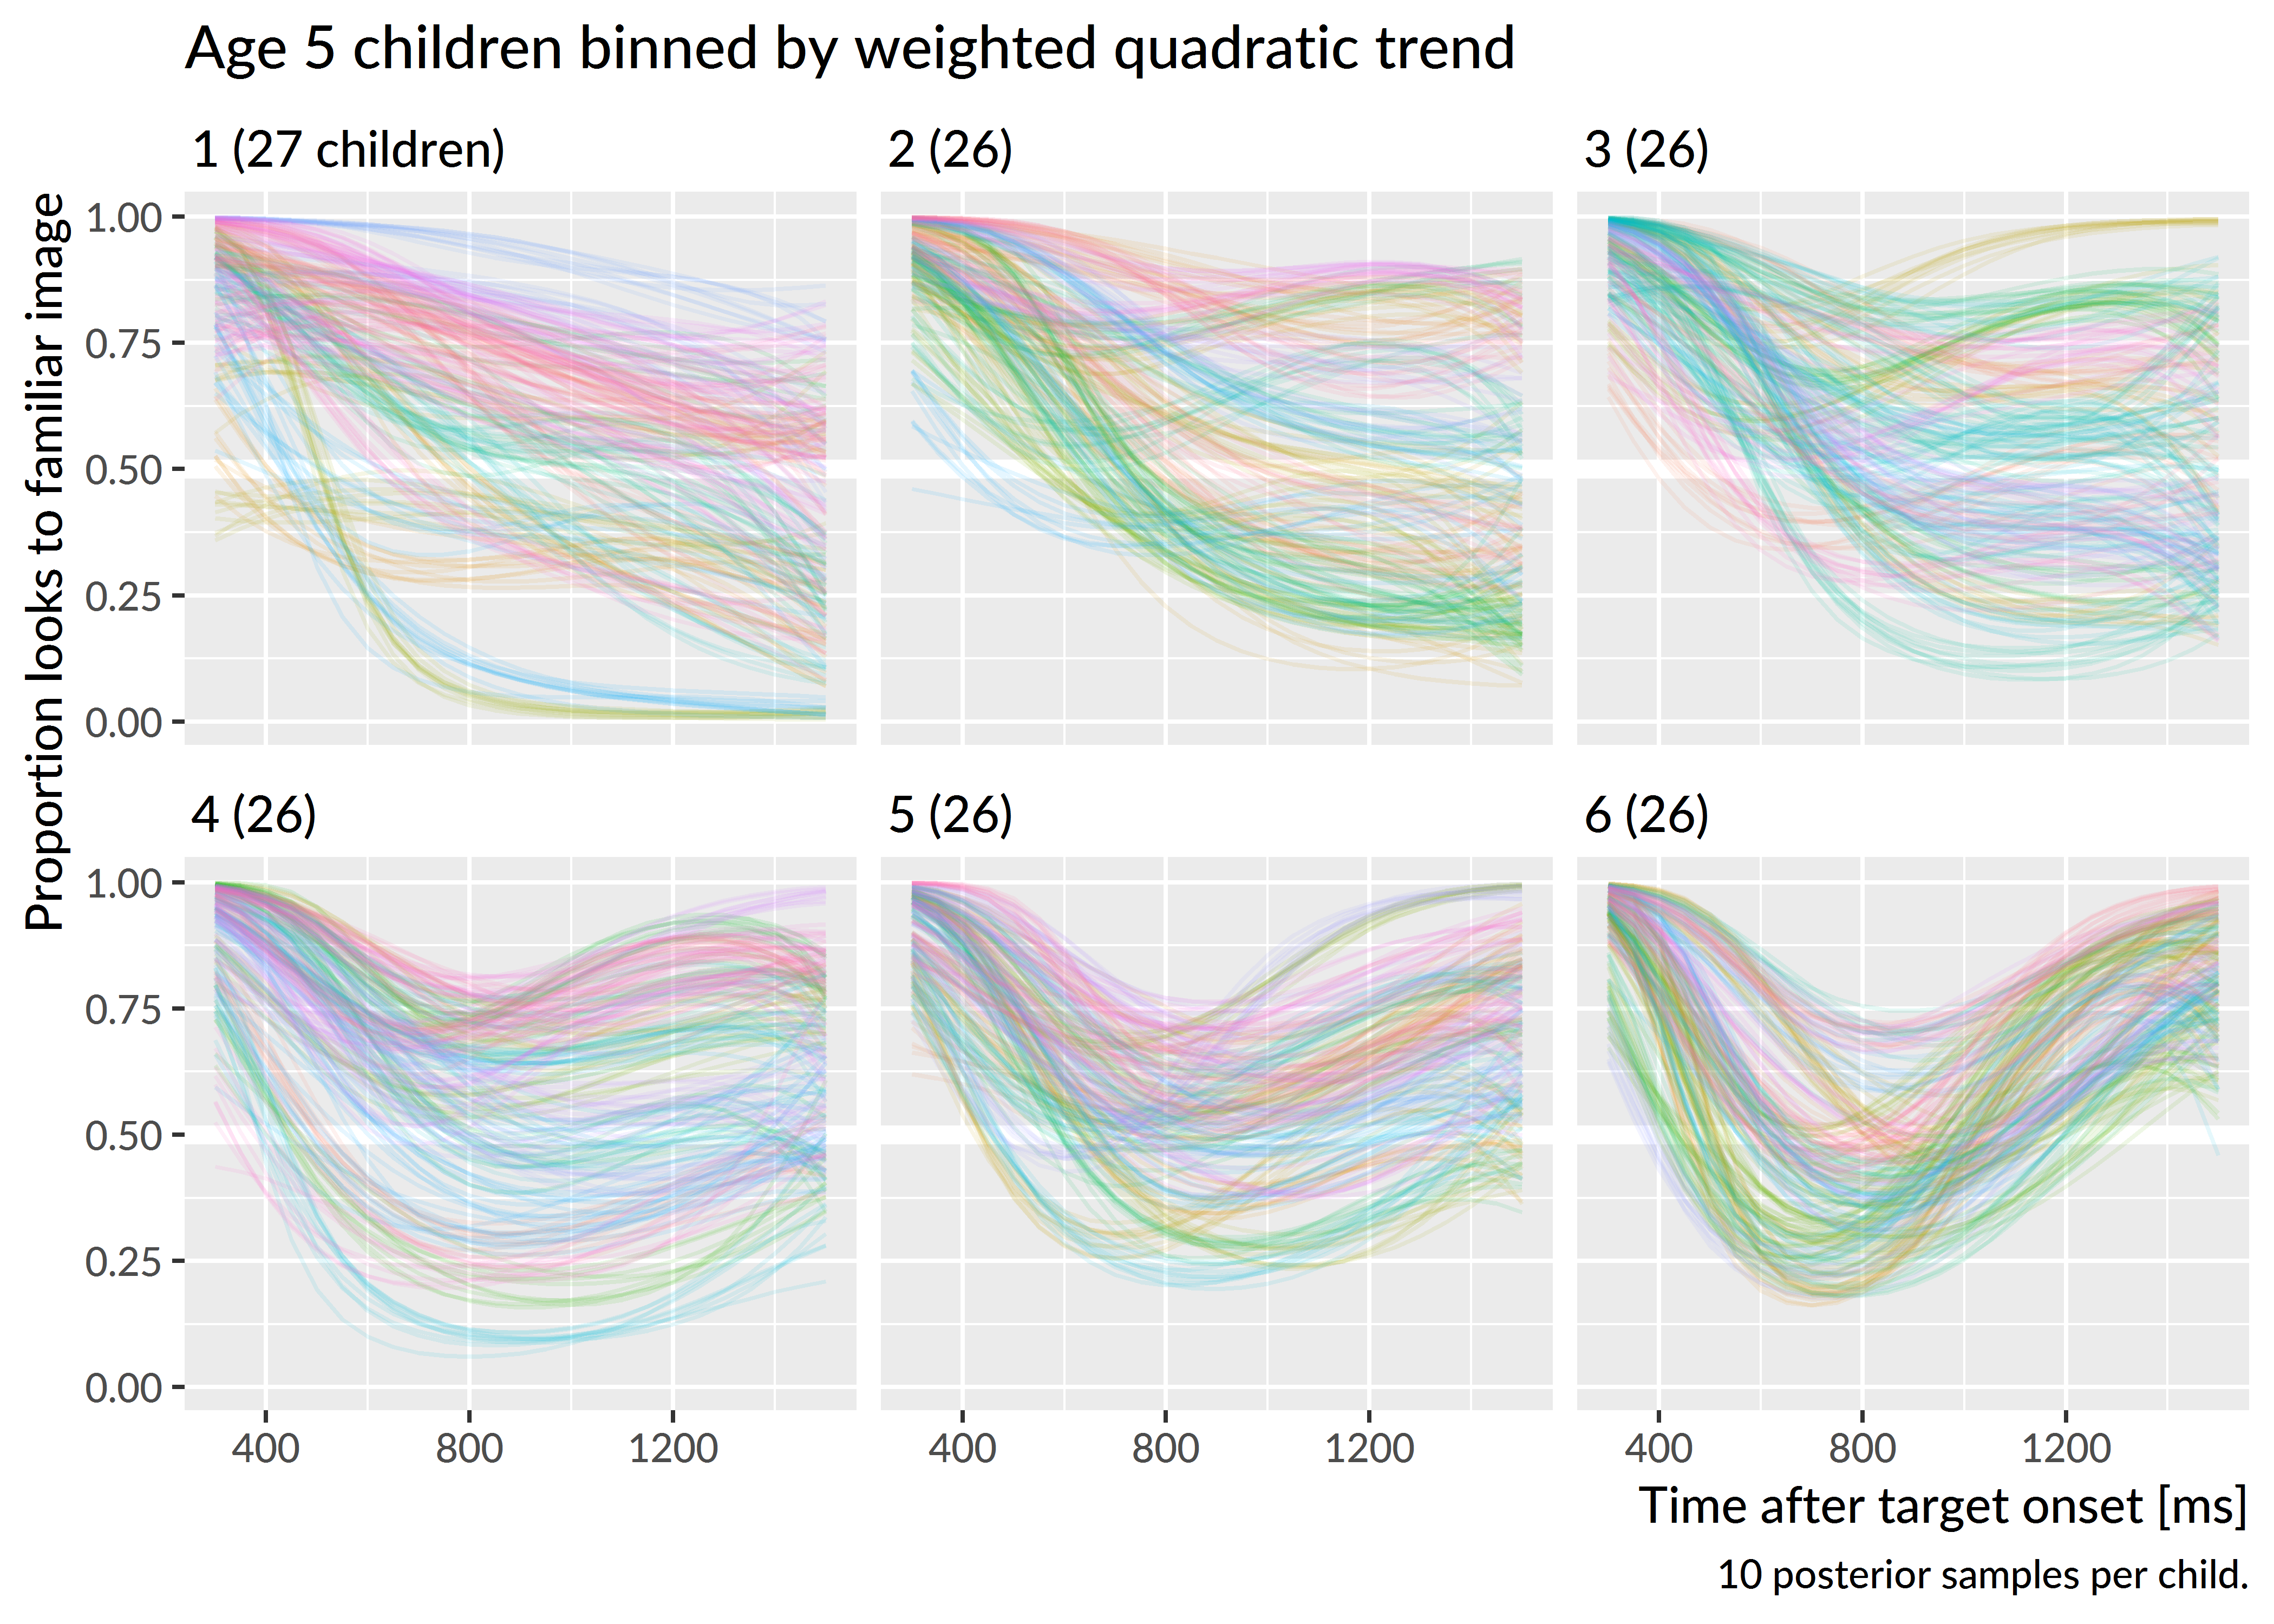 Growth curves for mispronunciation trials starting on the familiar image at age 5. Children were grouped into sextiles based on the posterior mean of their curves quadratic trend weighted by the height of the curve in the final time bins. Ten lines are drawn per child to visualize uncertainty. Children were assigned colors arbitrarily.